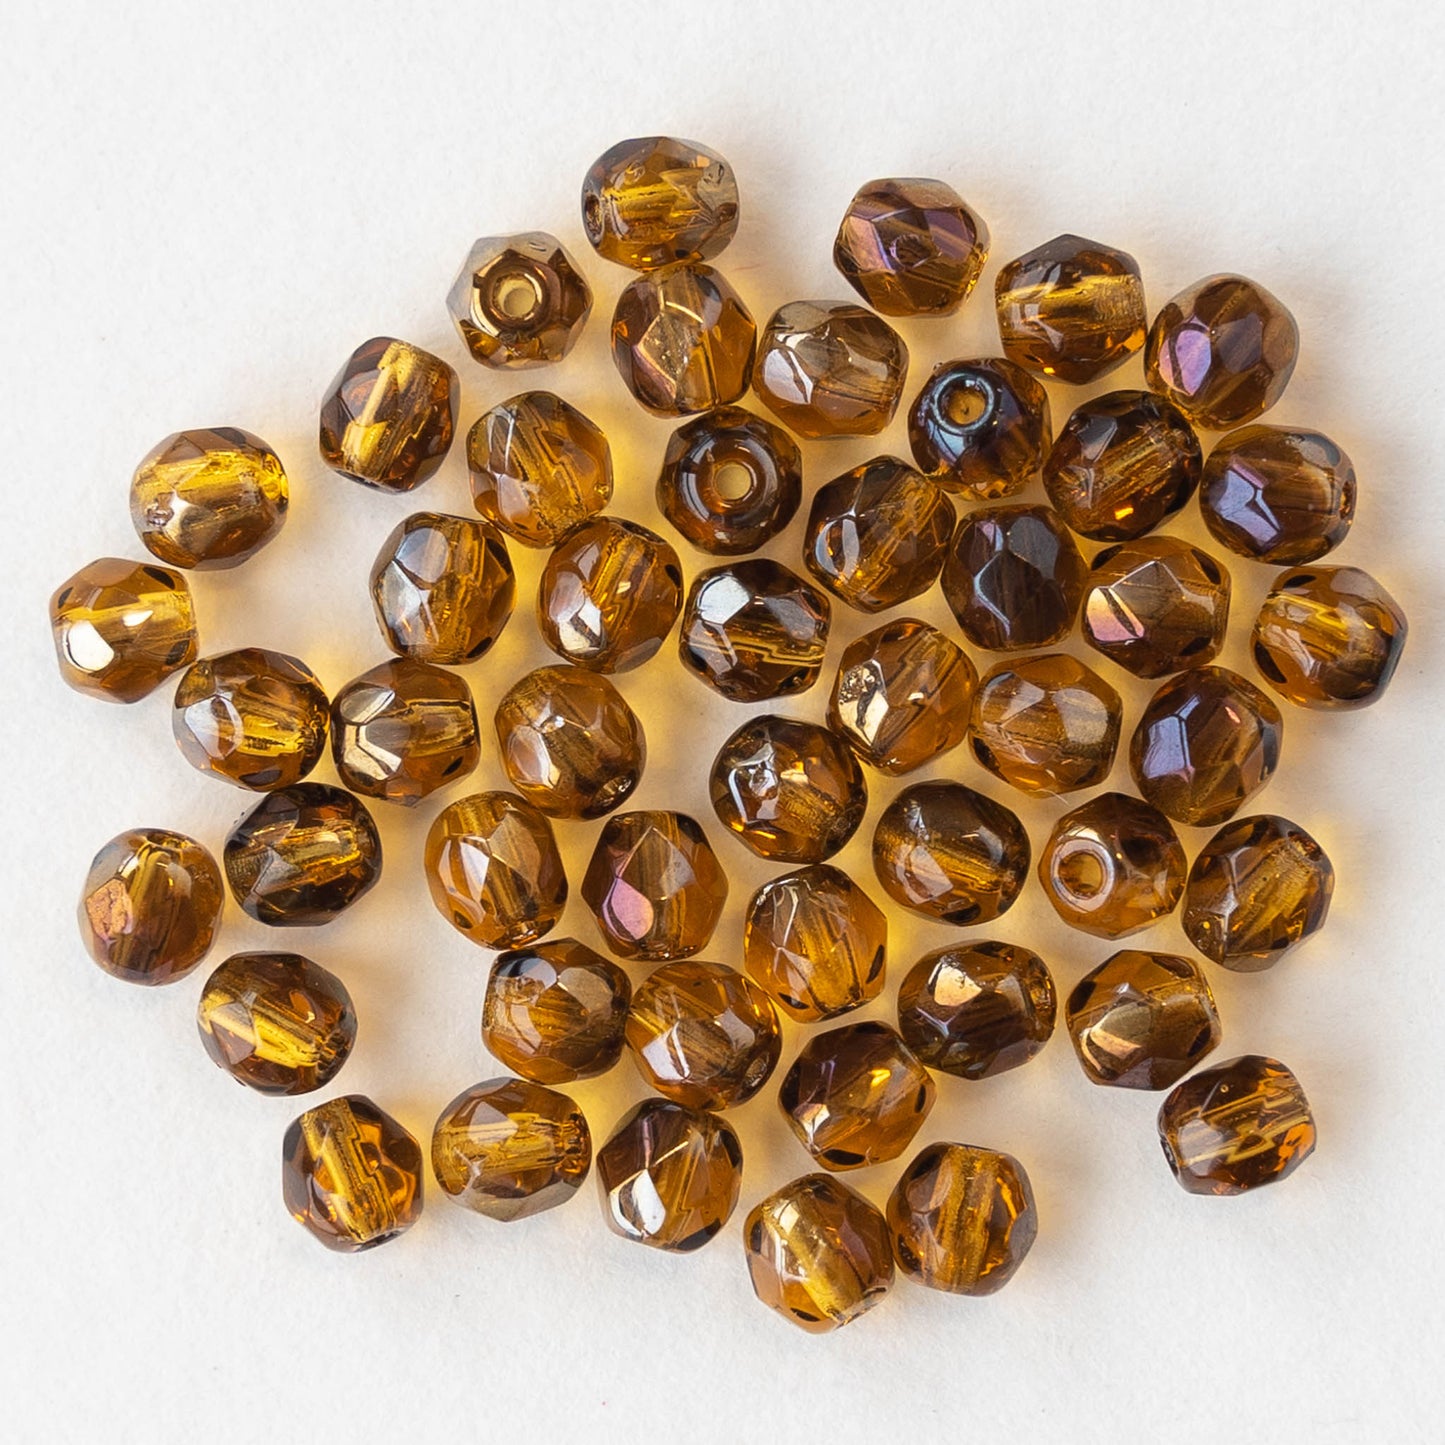 4mm Round Firepolished Beads - Amber Luster - 50 beads